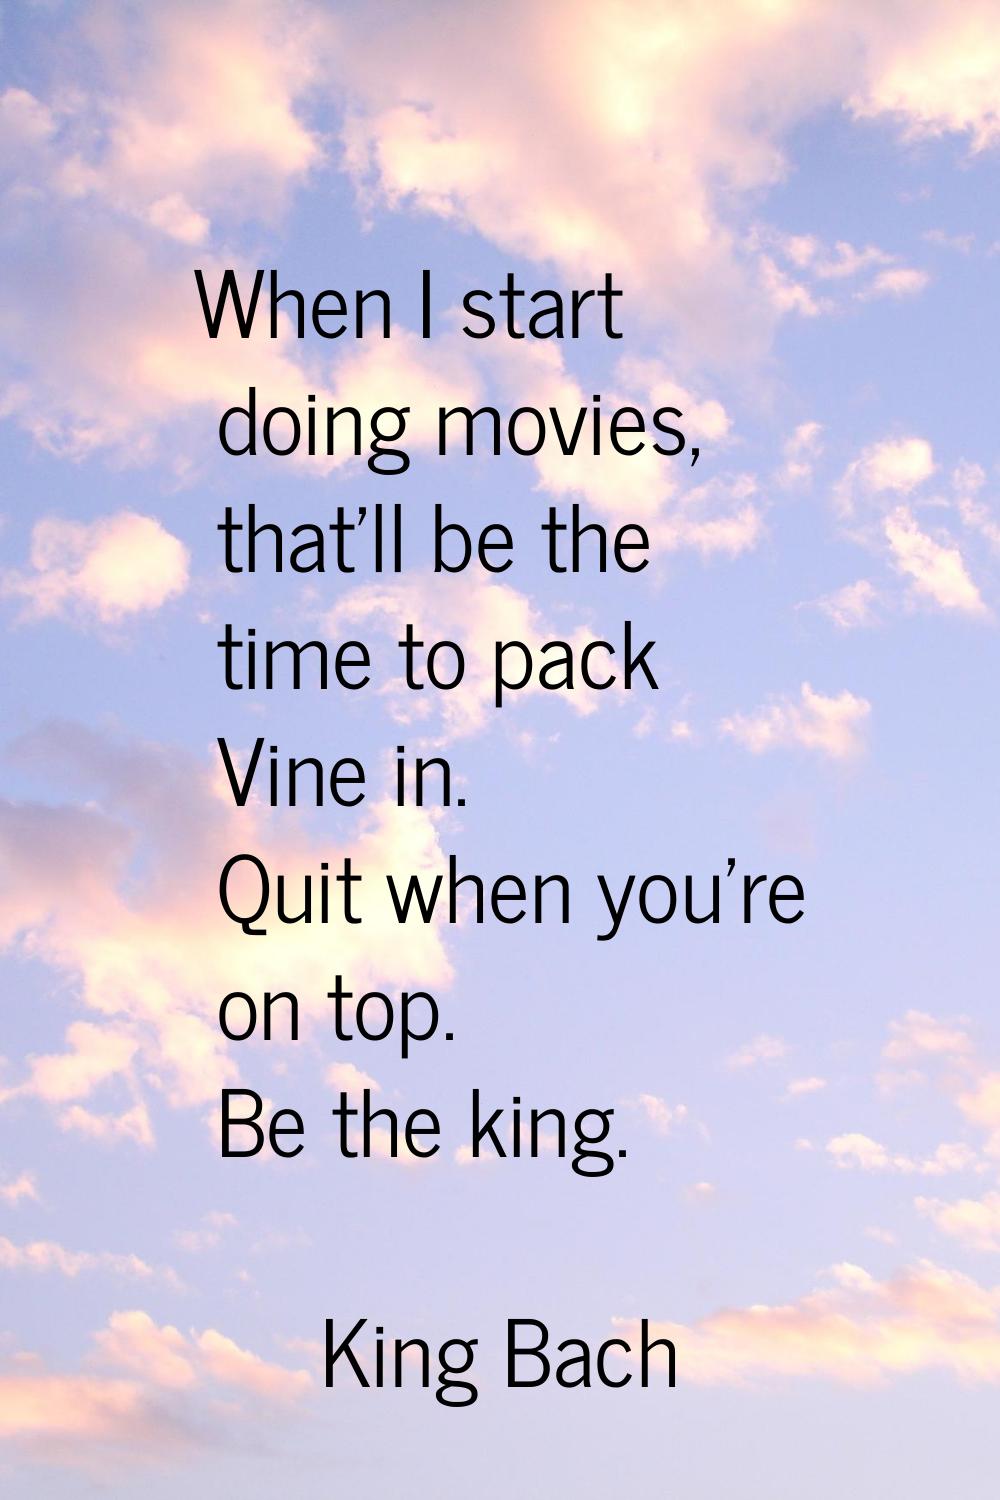 When I start doing movies, that'll be the time to pack Vine in. Quit when you're on top. Be the kin